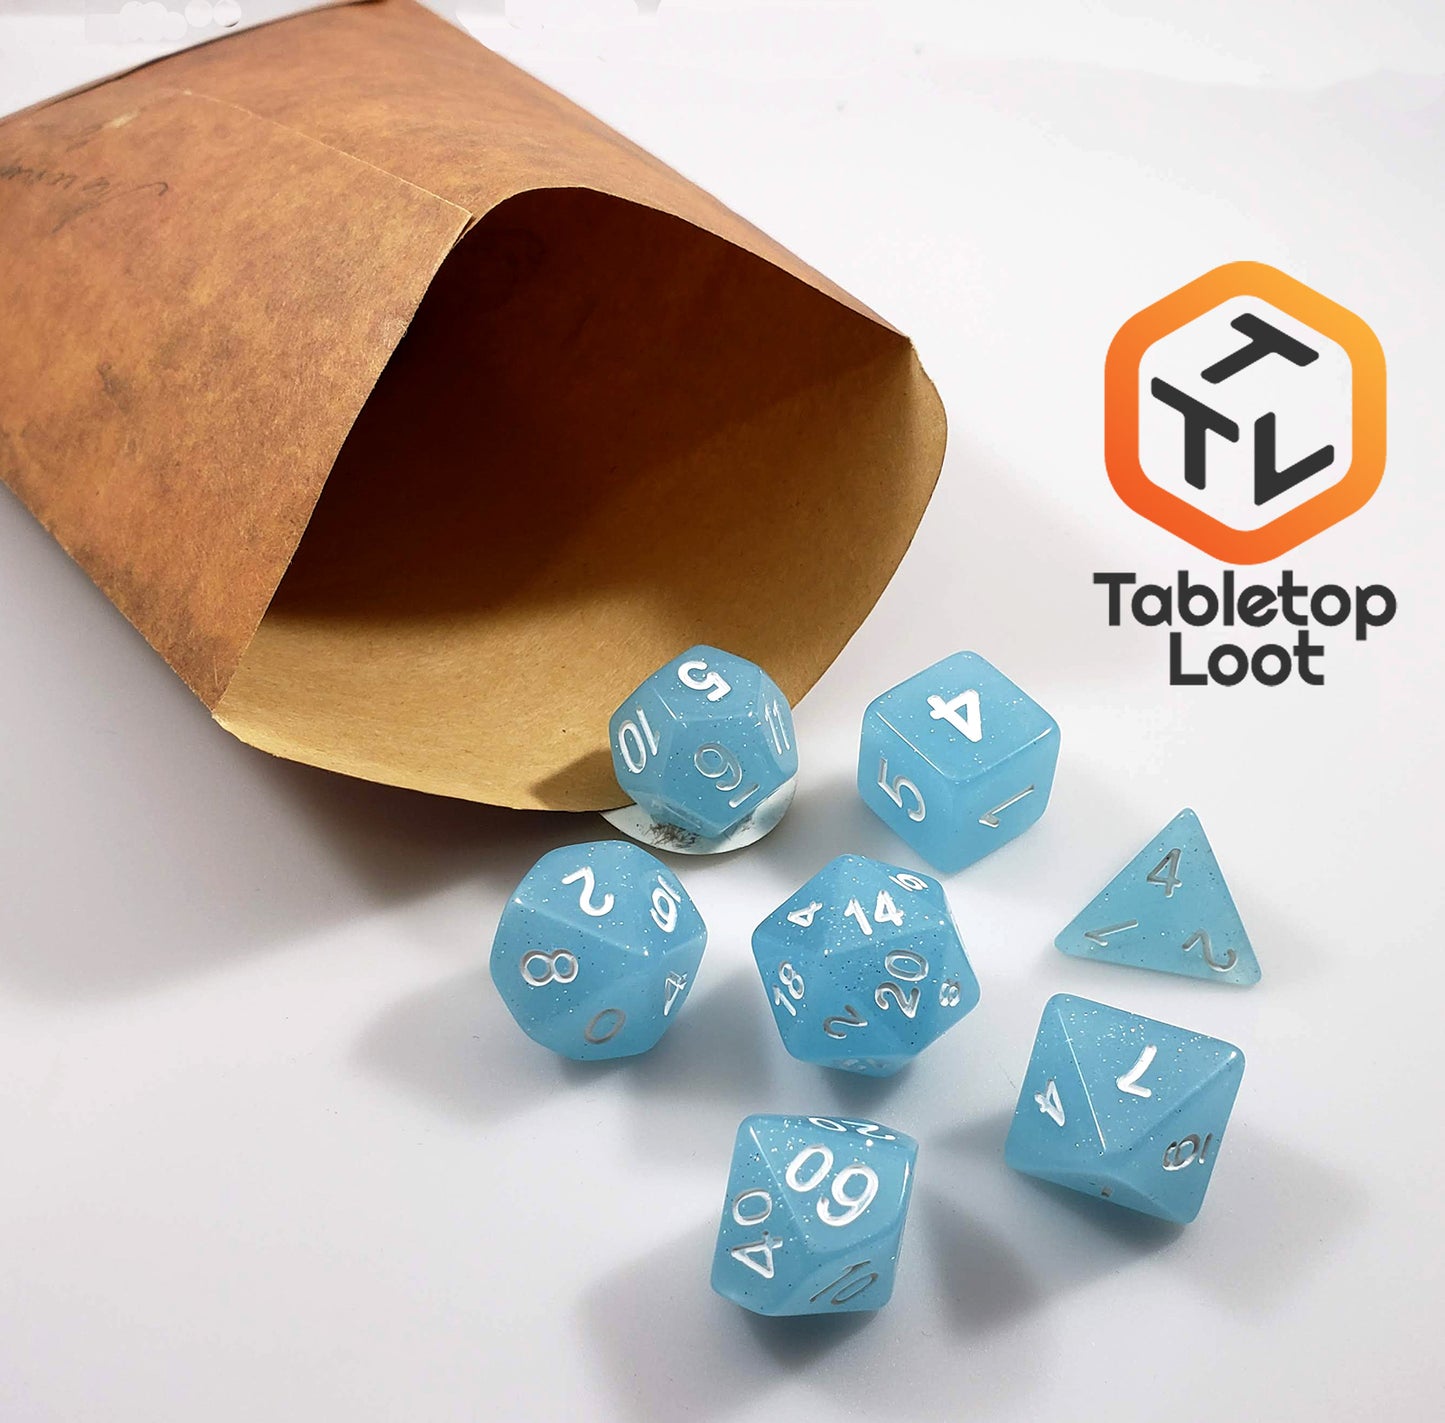 The Frosted Blueberry 7 piece dice set from Tabletop Loot with light blue sparkly resin and silver numbering.